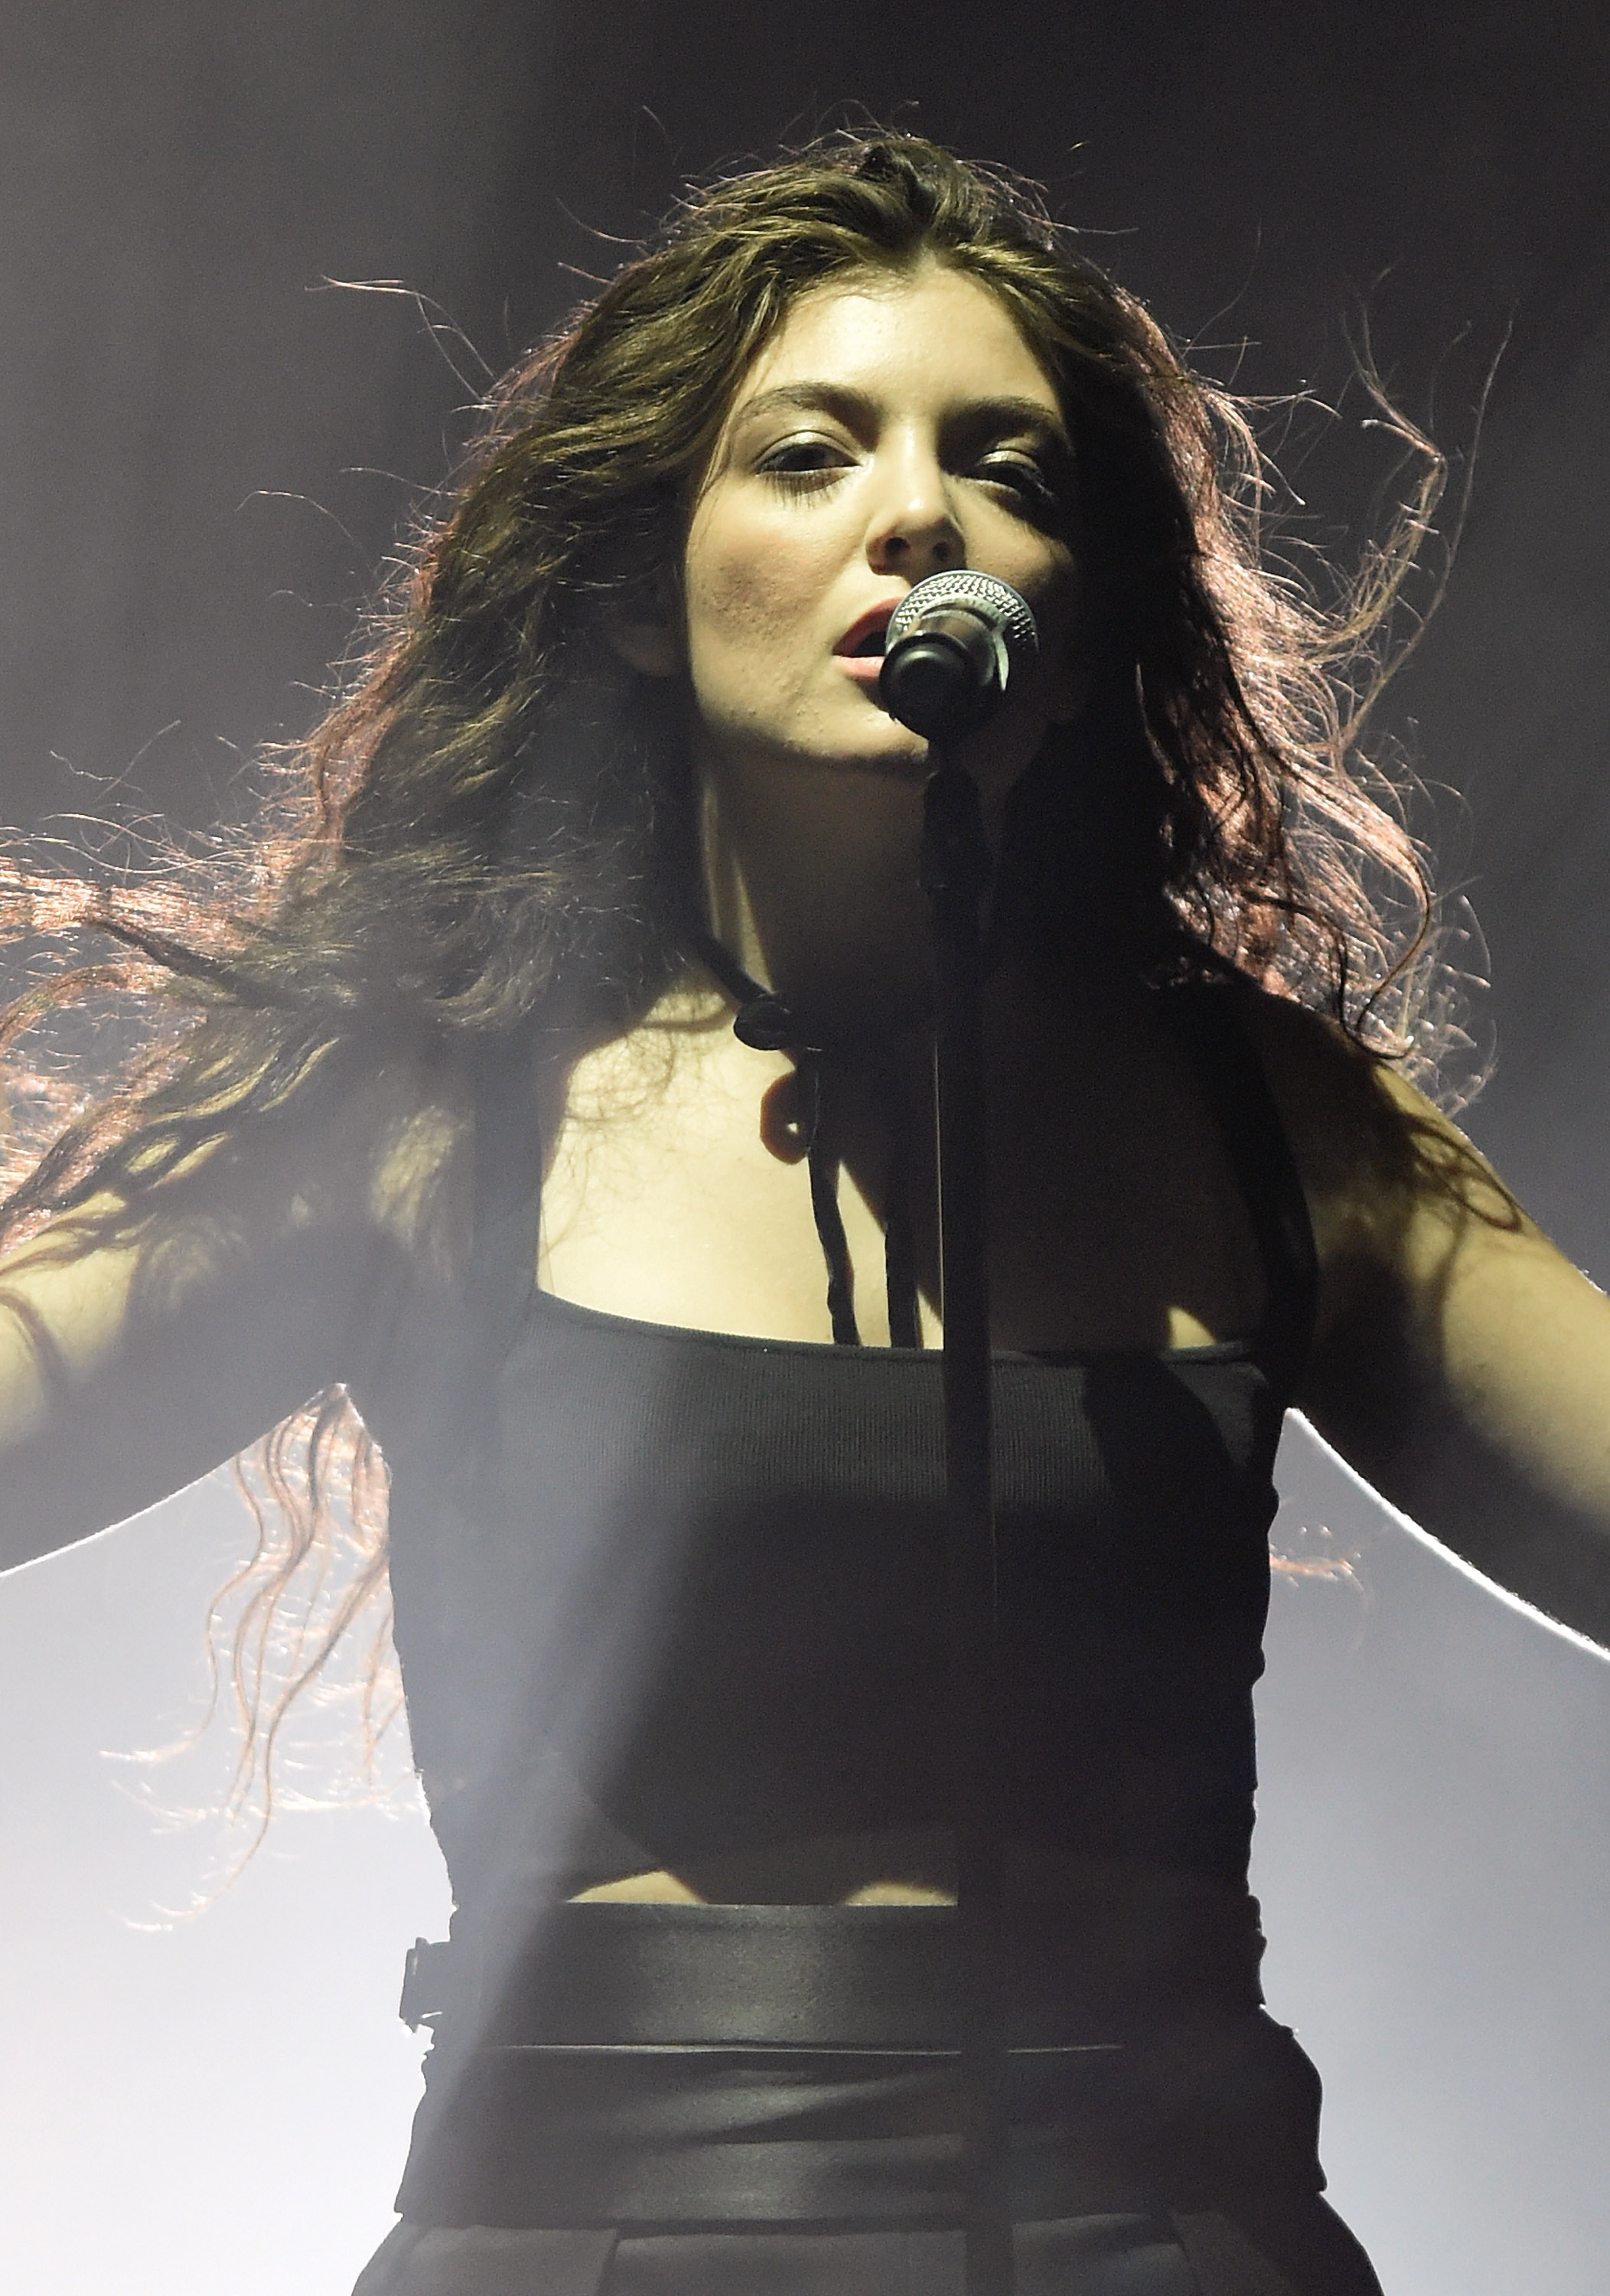 Lorde's Royals Banned During World Series, US News